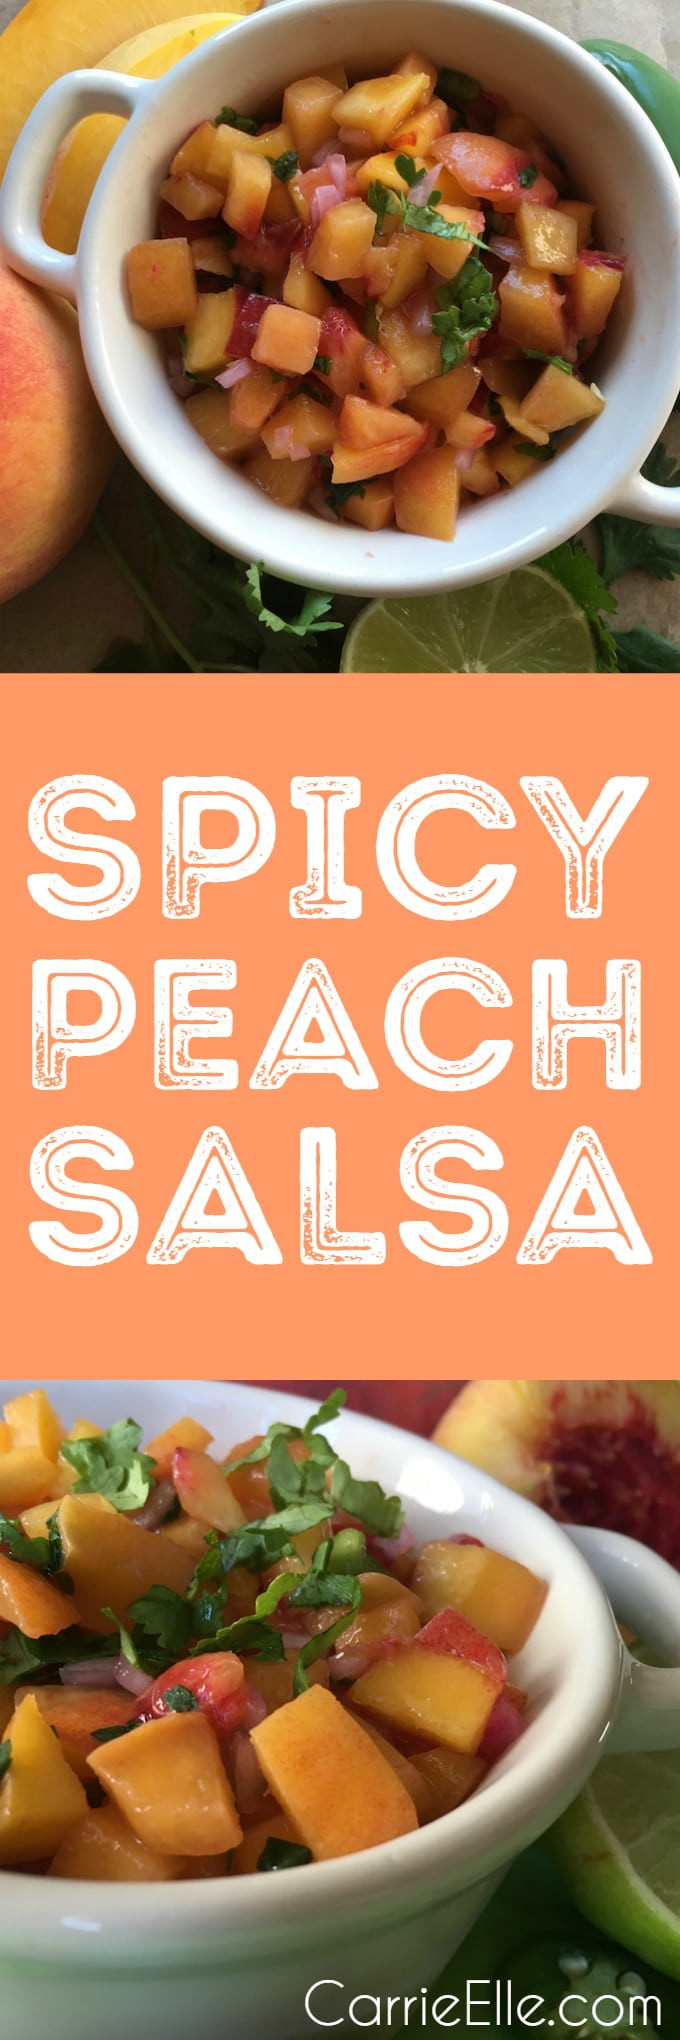 Recipe For Peach Salsa
 Spicy Peach Salsa 21 Day Fix and Weight Watchers approved